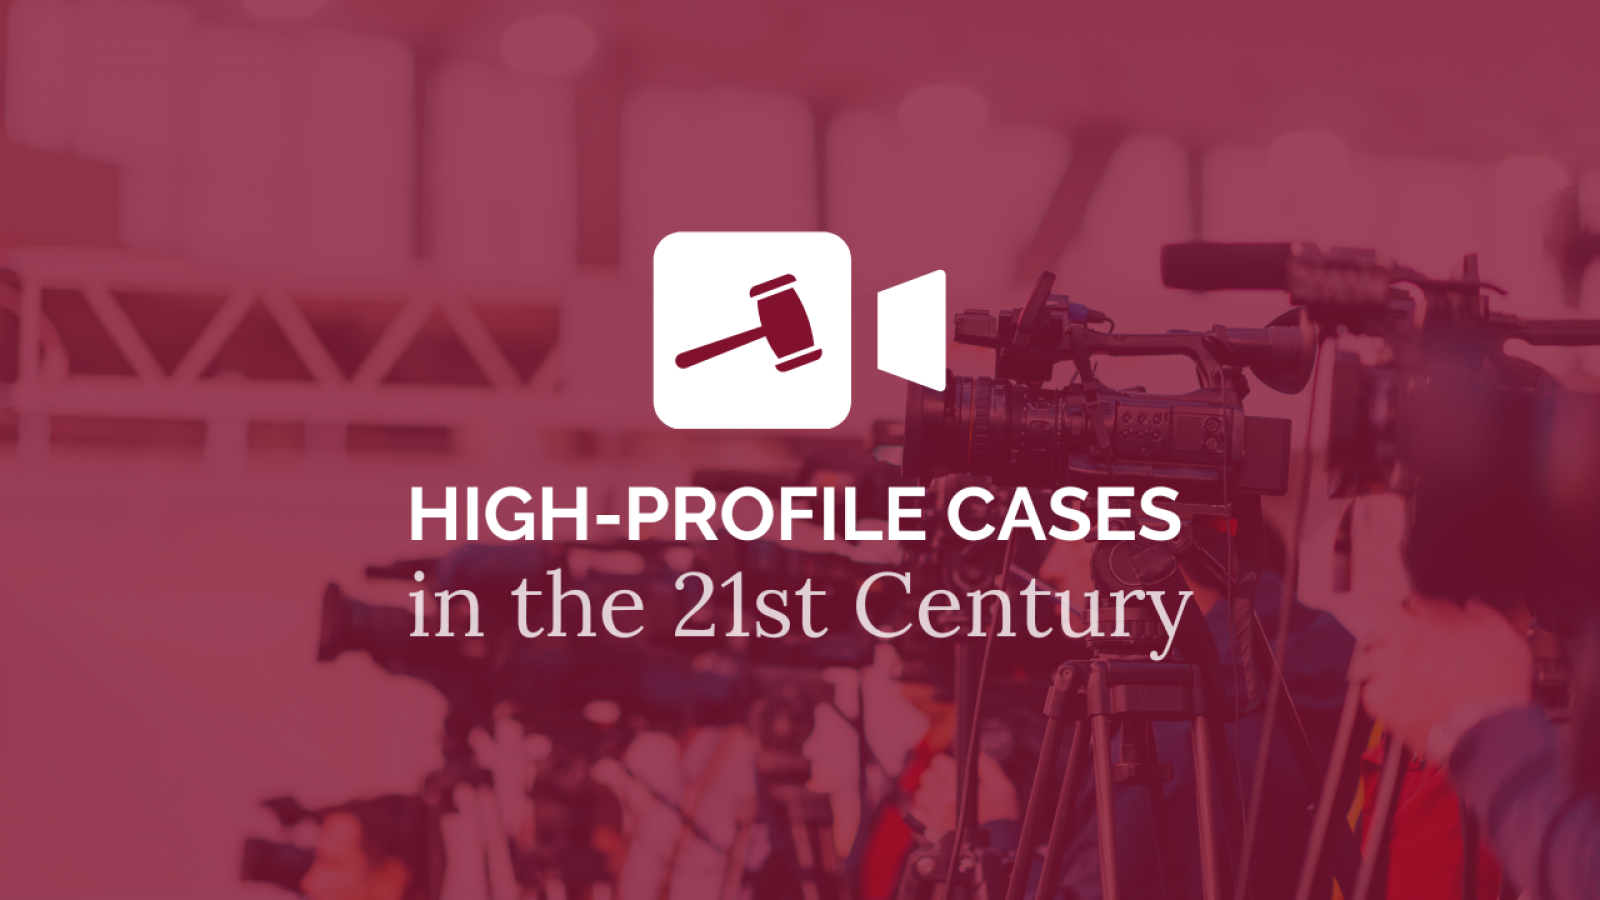 HIgh profile cases in the media. banner image